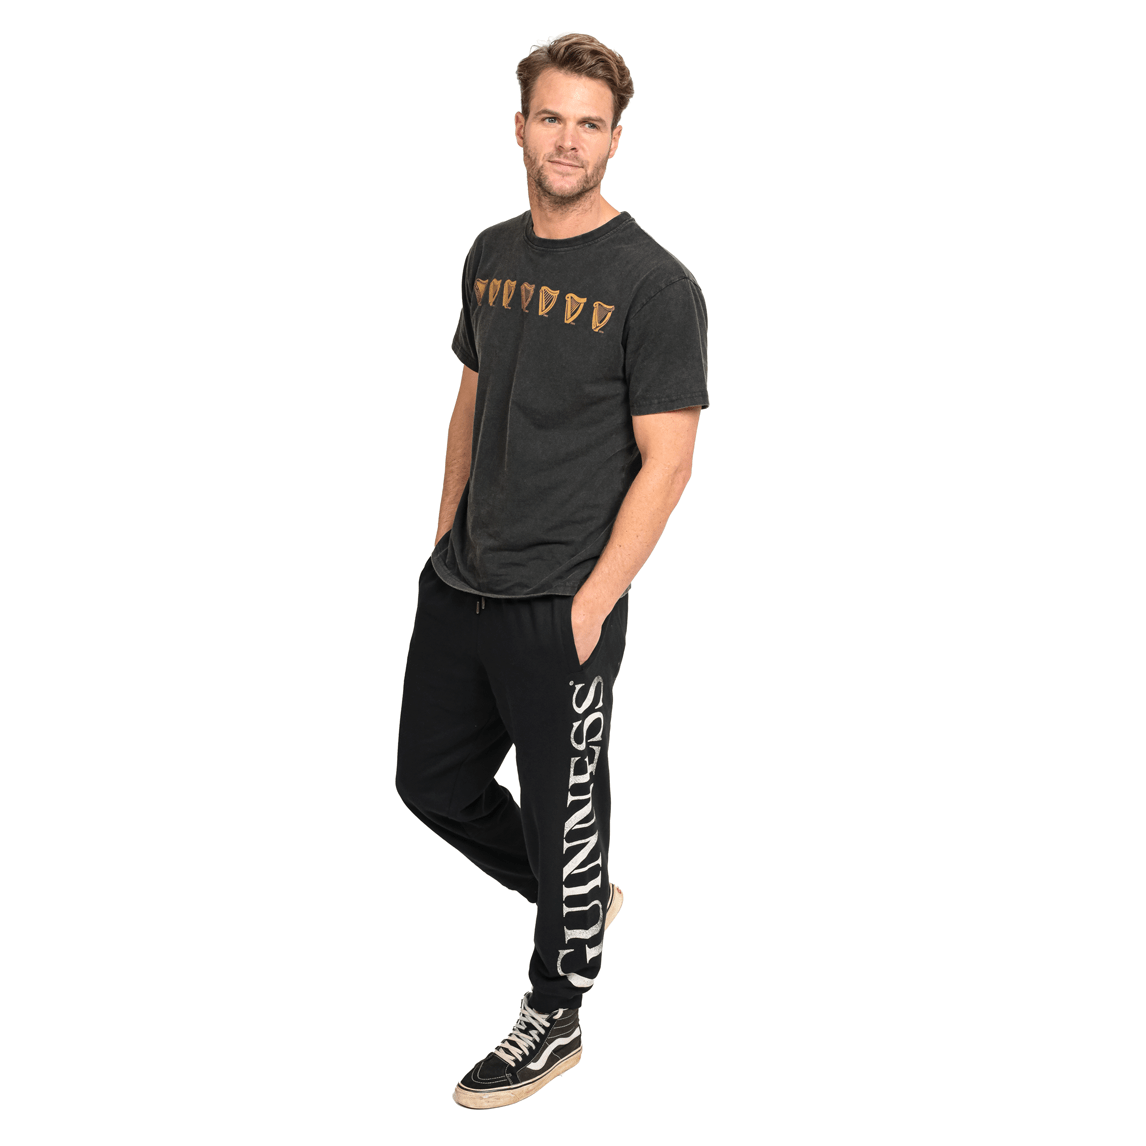 A man wearing comfortable Guinness joggers made of organic cotton.